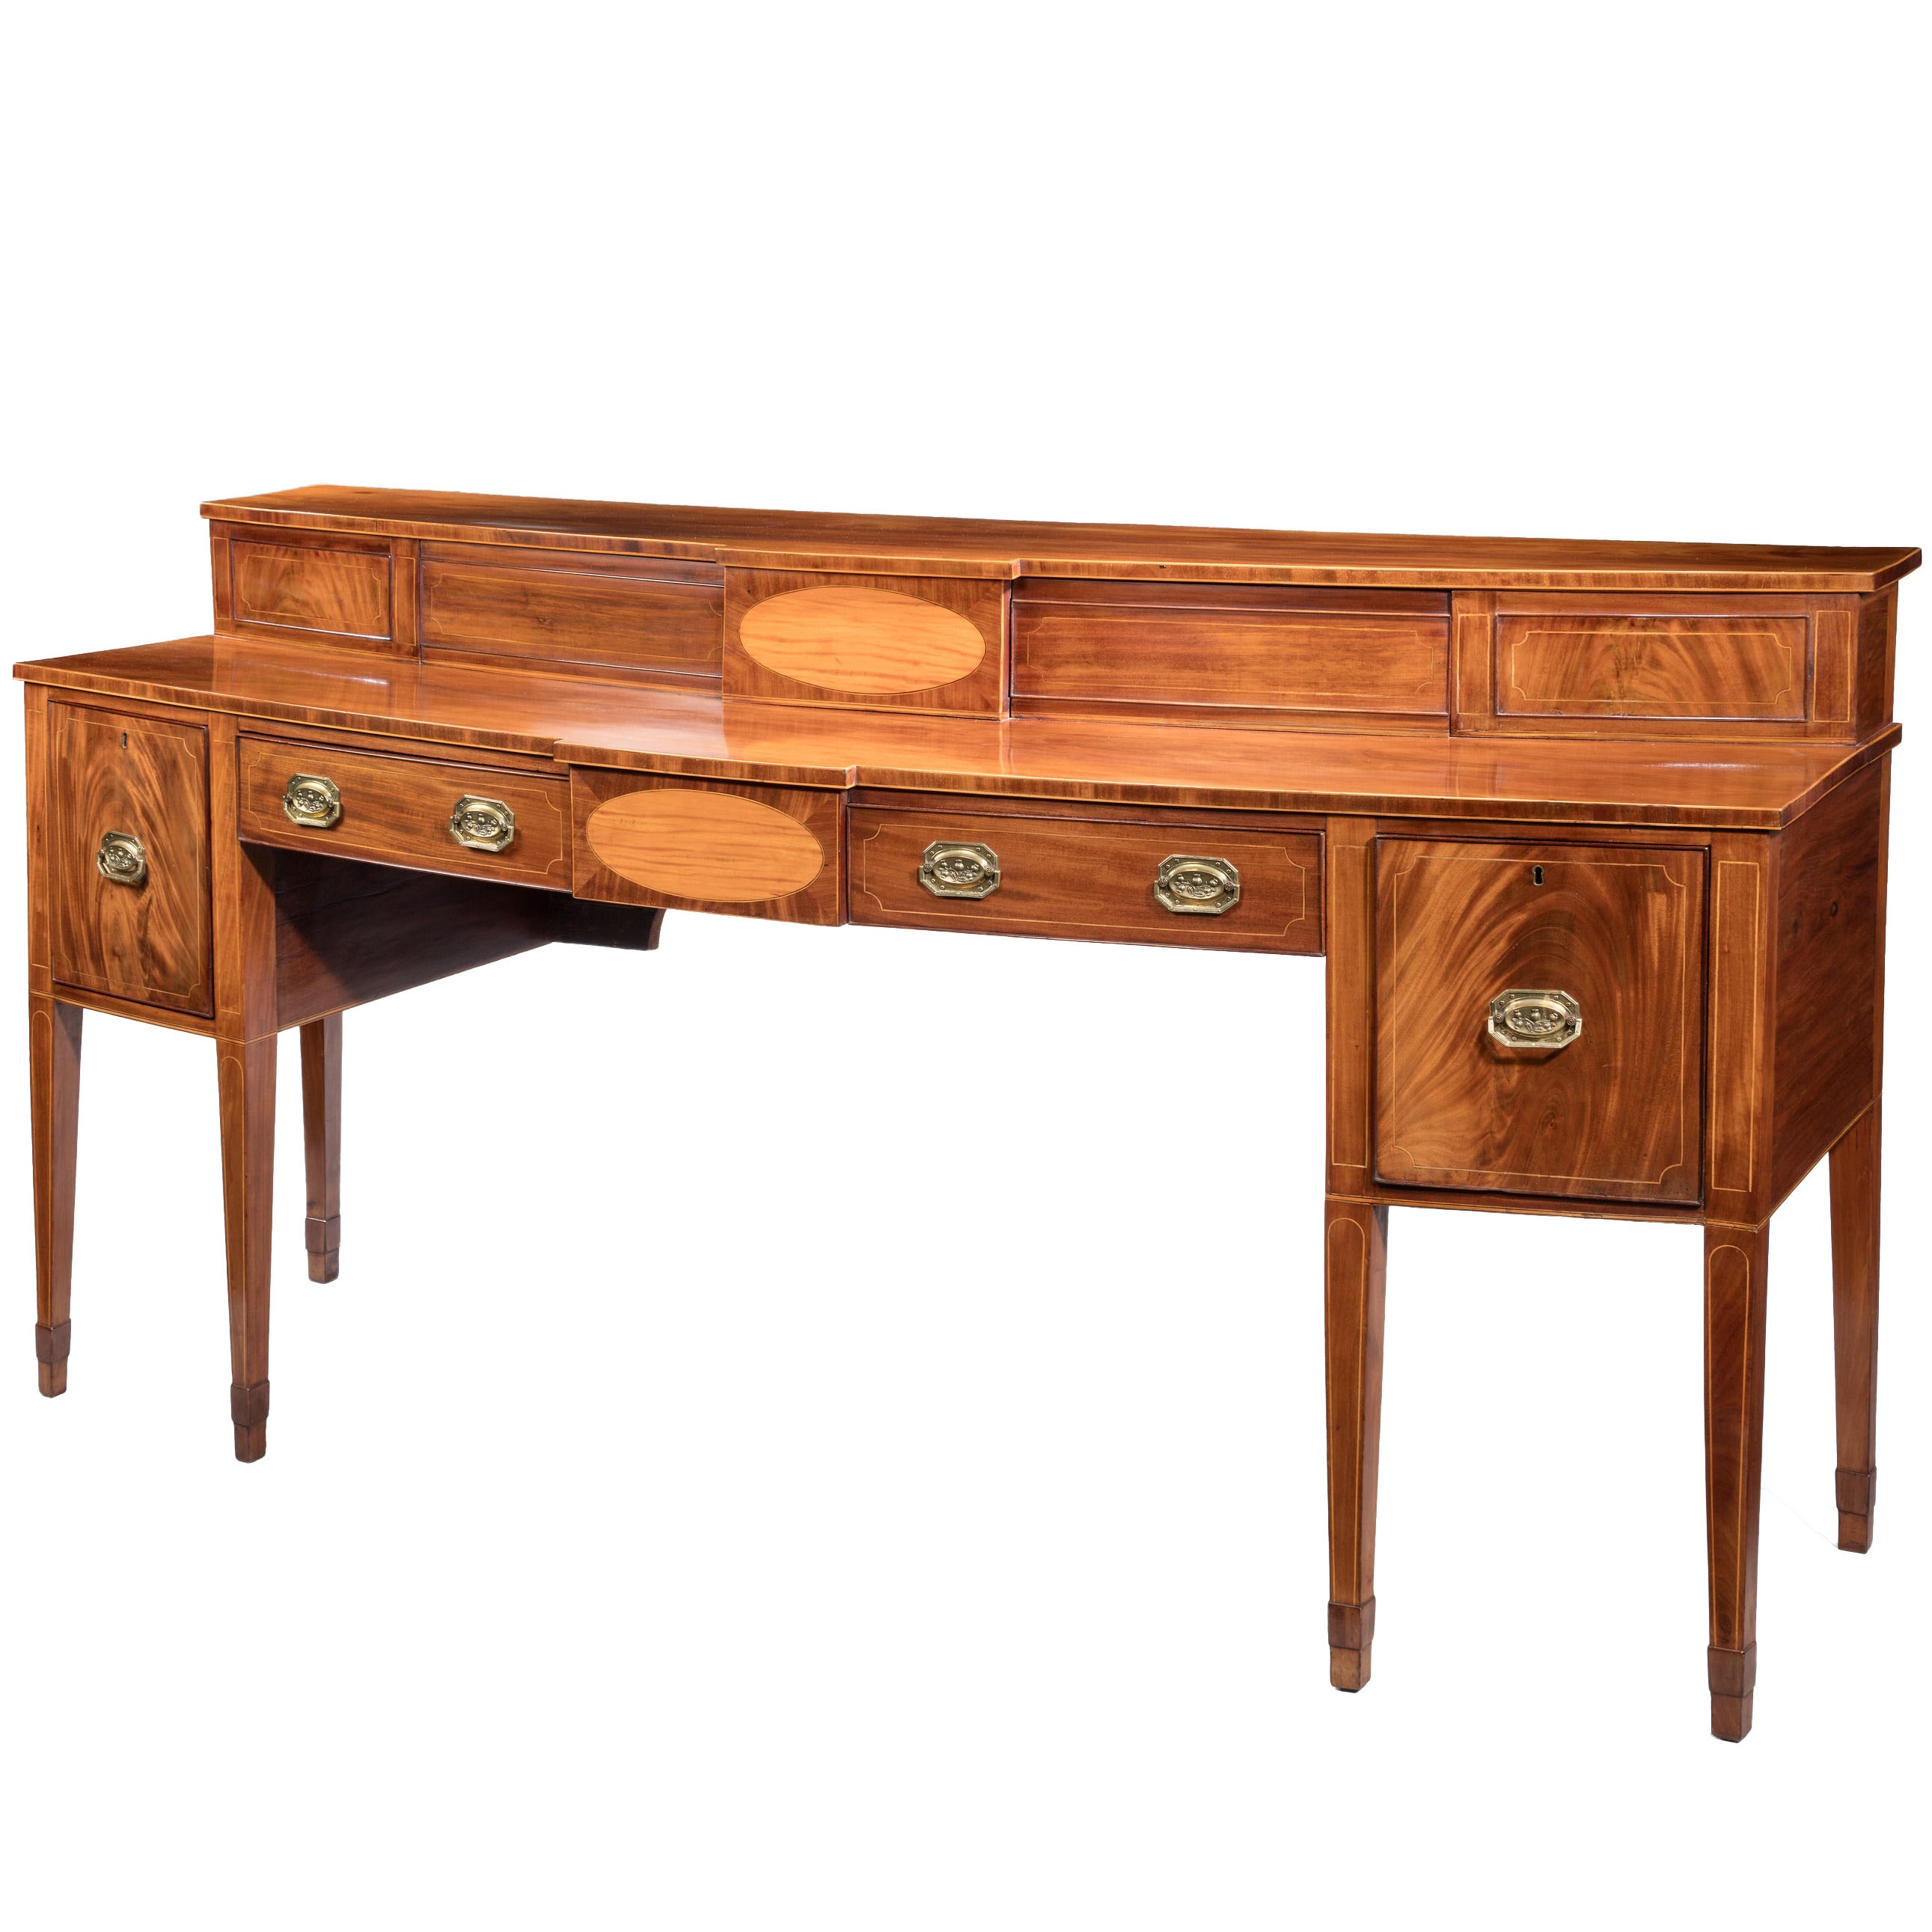 Hepplewhite Period Mahogany Bowfront Sideboard For Sale